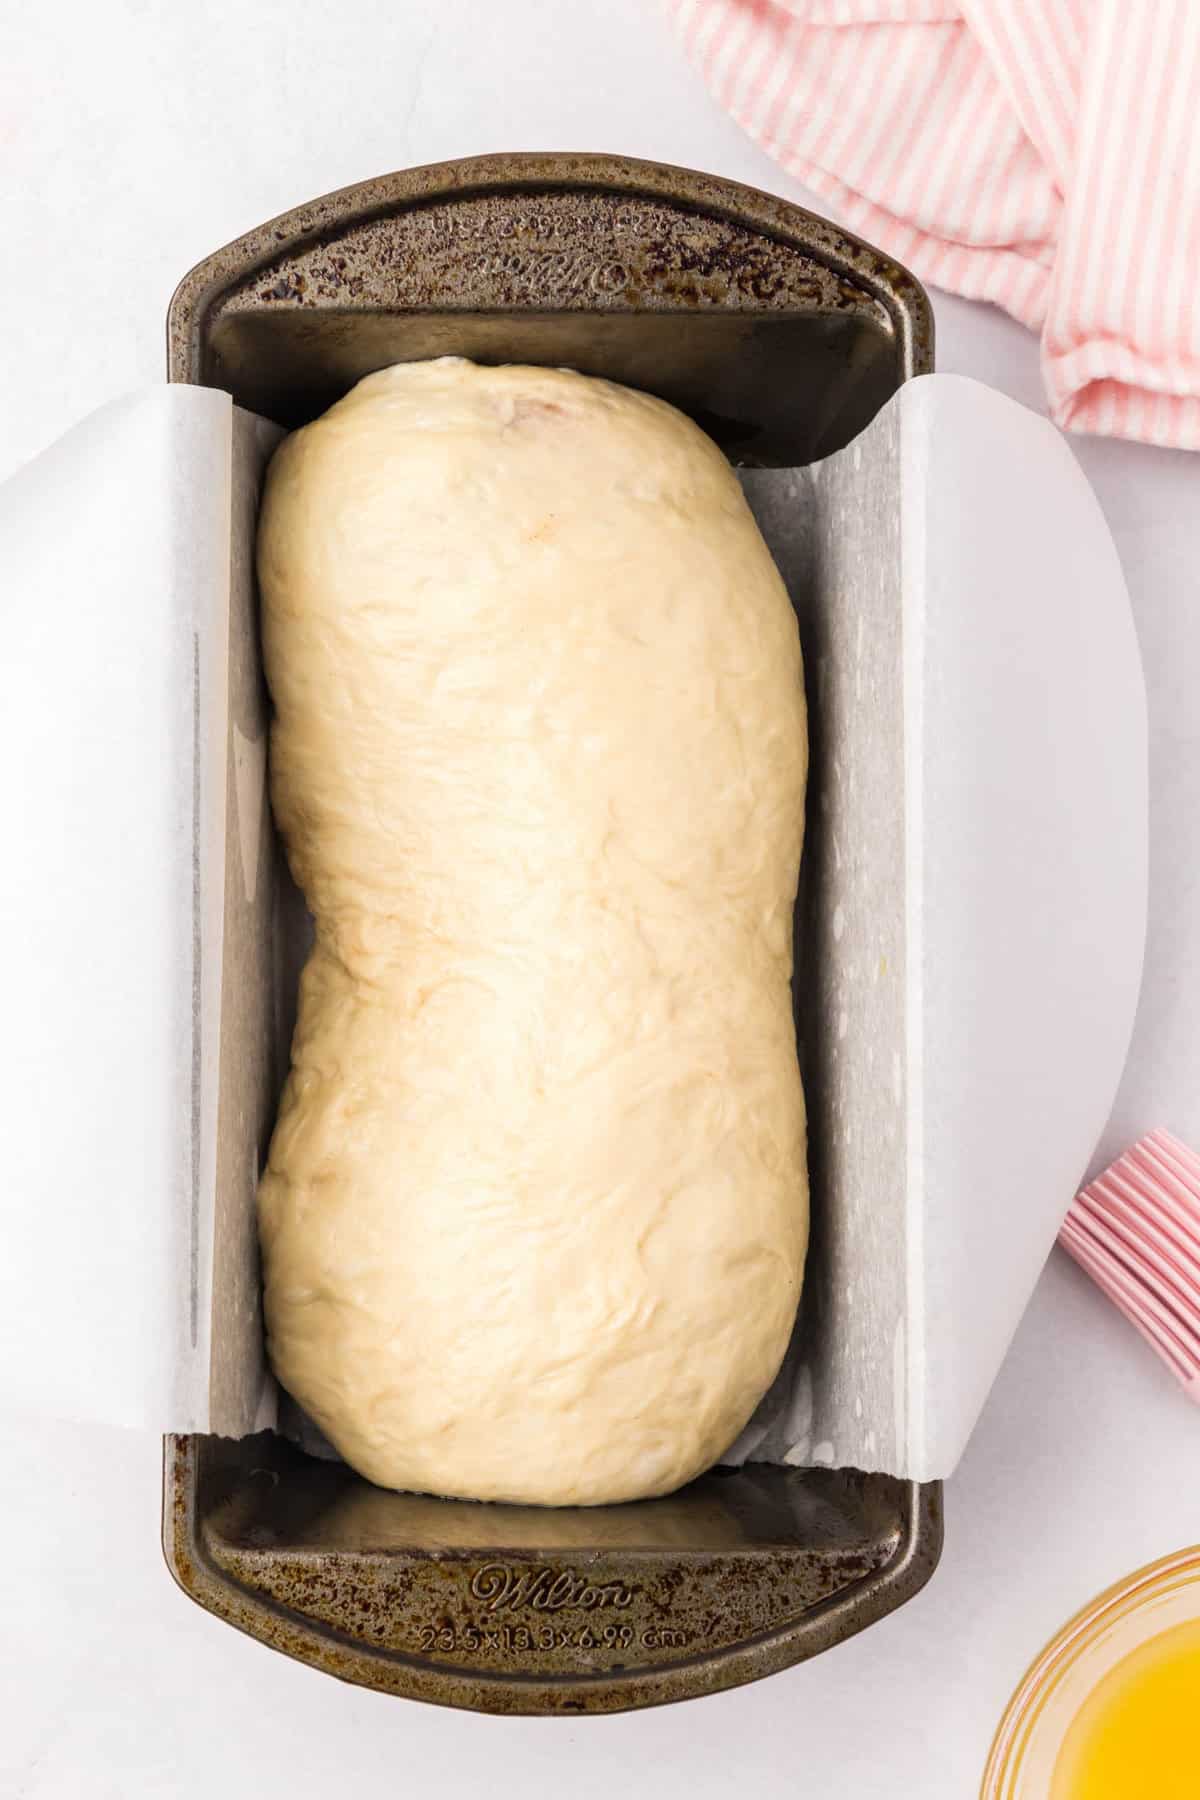 Rolled up dough, tucking in the sides. Place the bread in the prepared bread pan for Cinnamon Swirl Bread